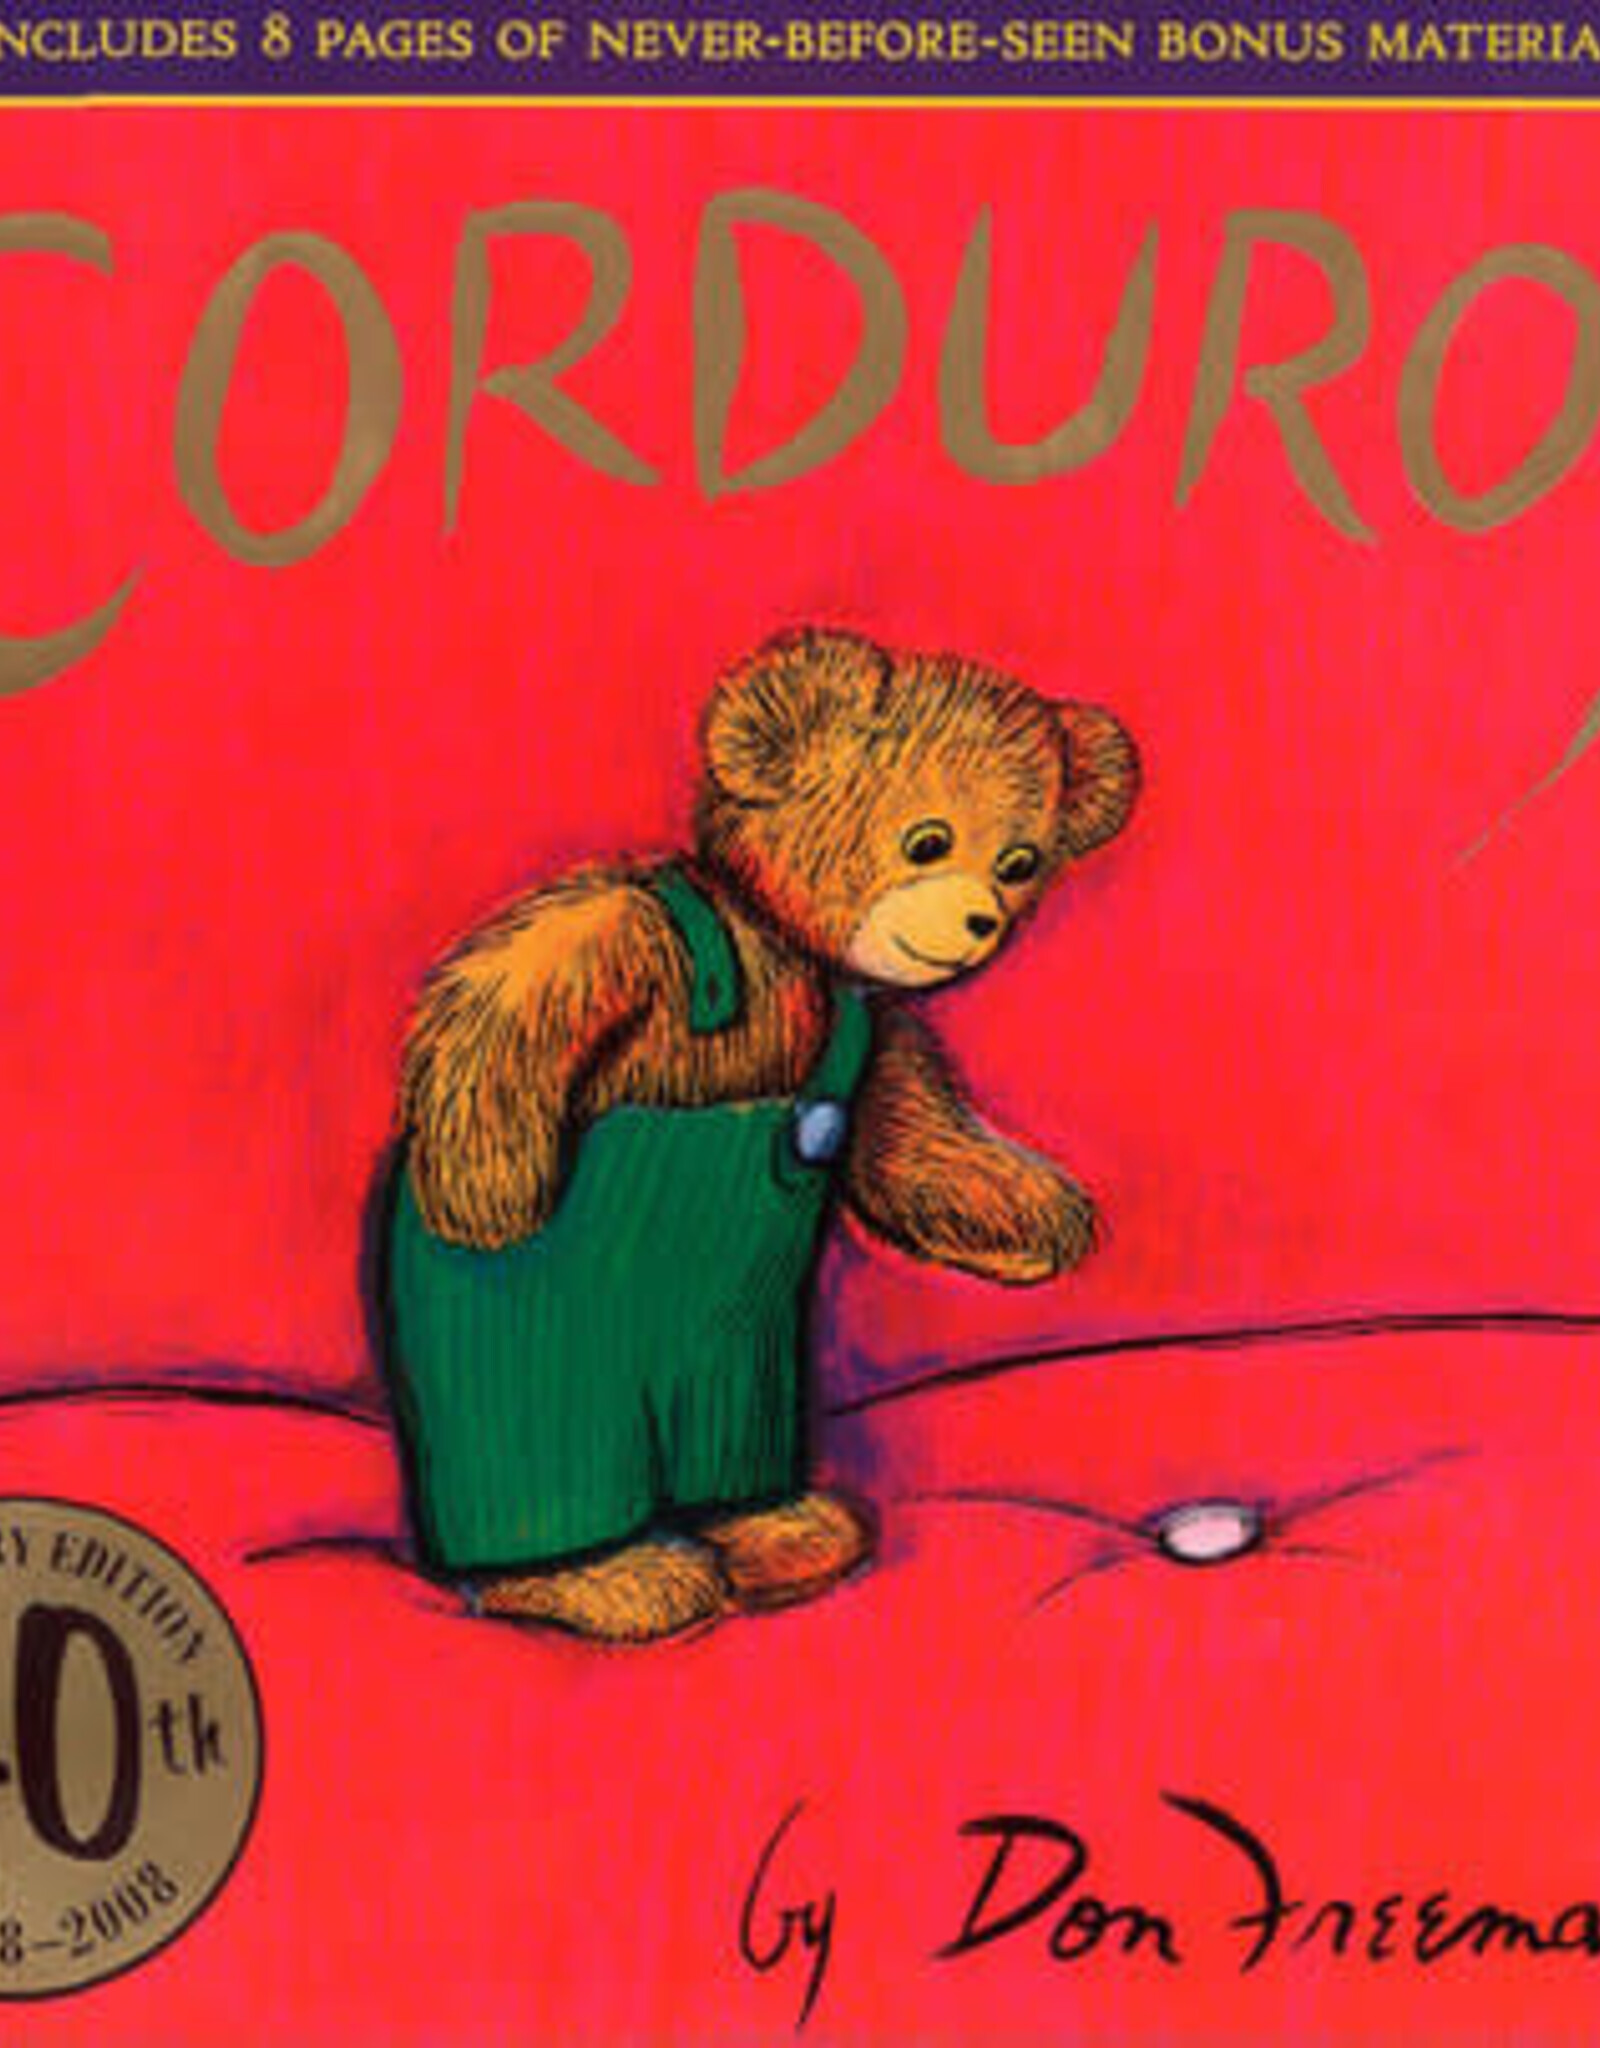 BOOK PUBLISHERS CORDUROY 40TH ANNV EDITION